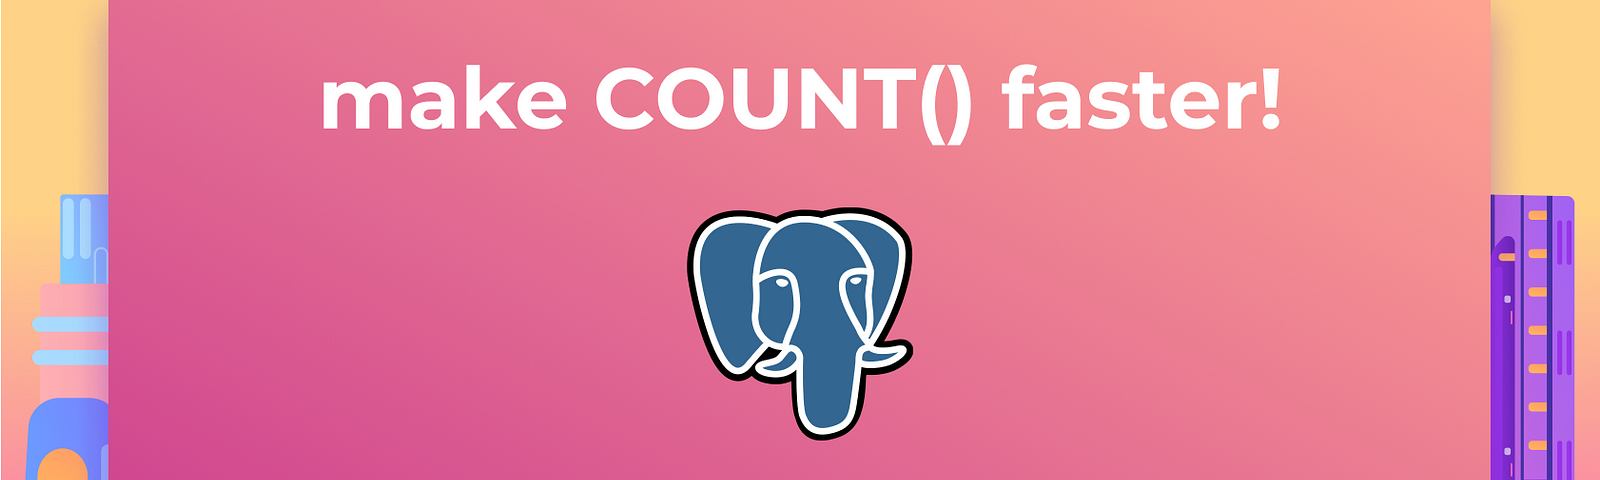 Counting faster with Postgres